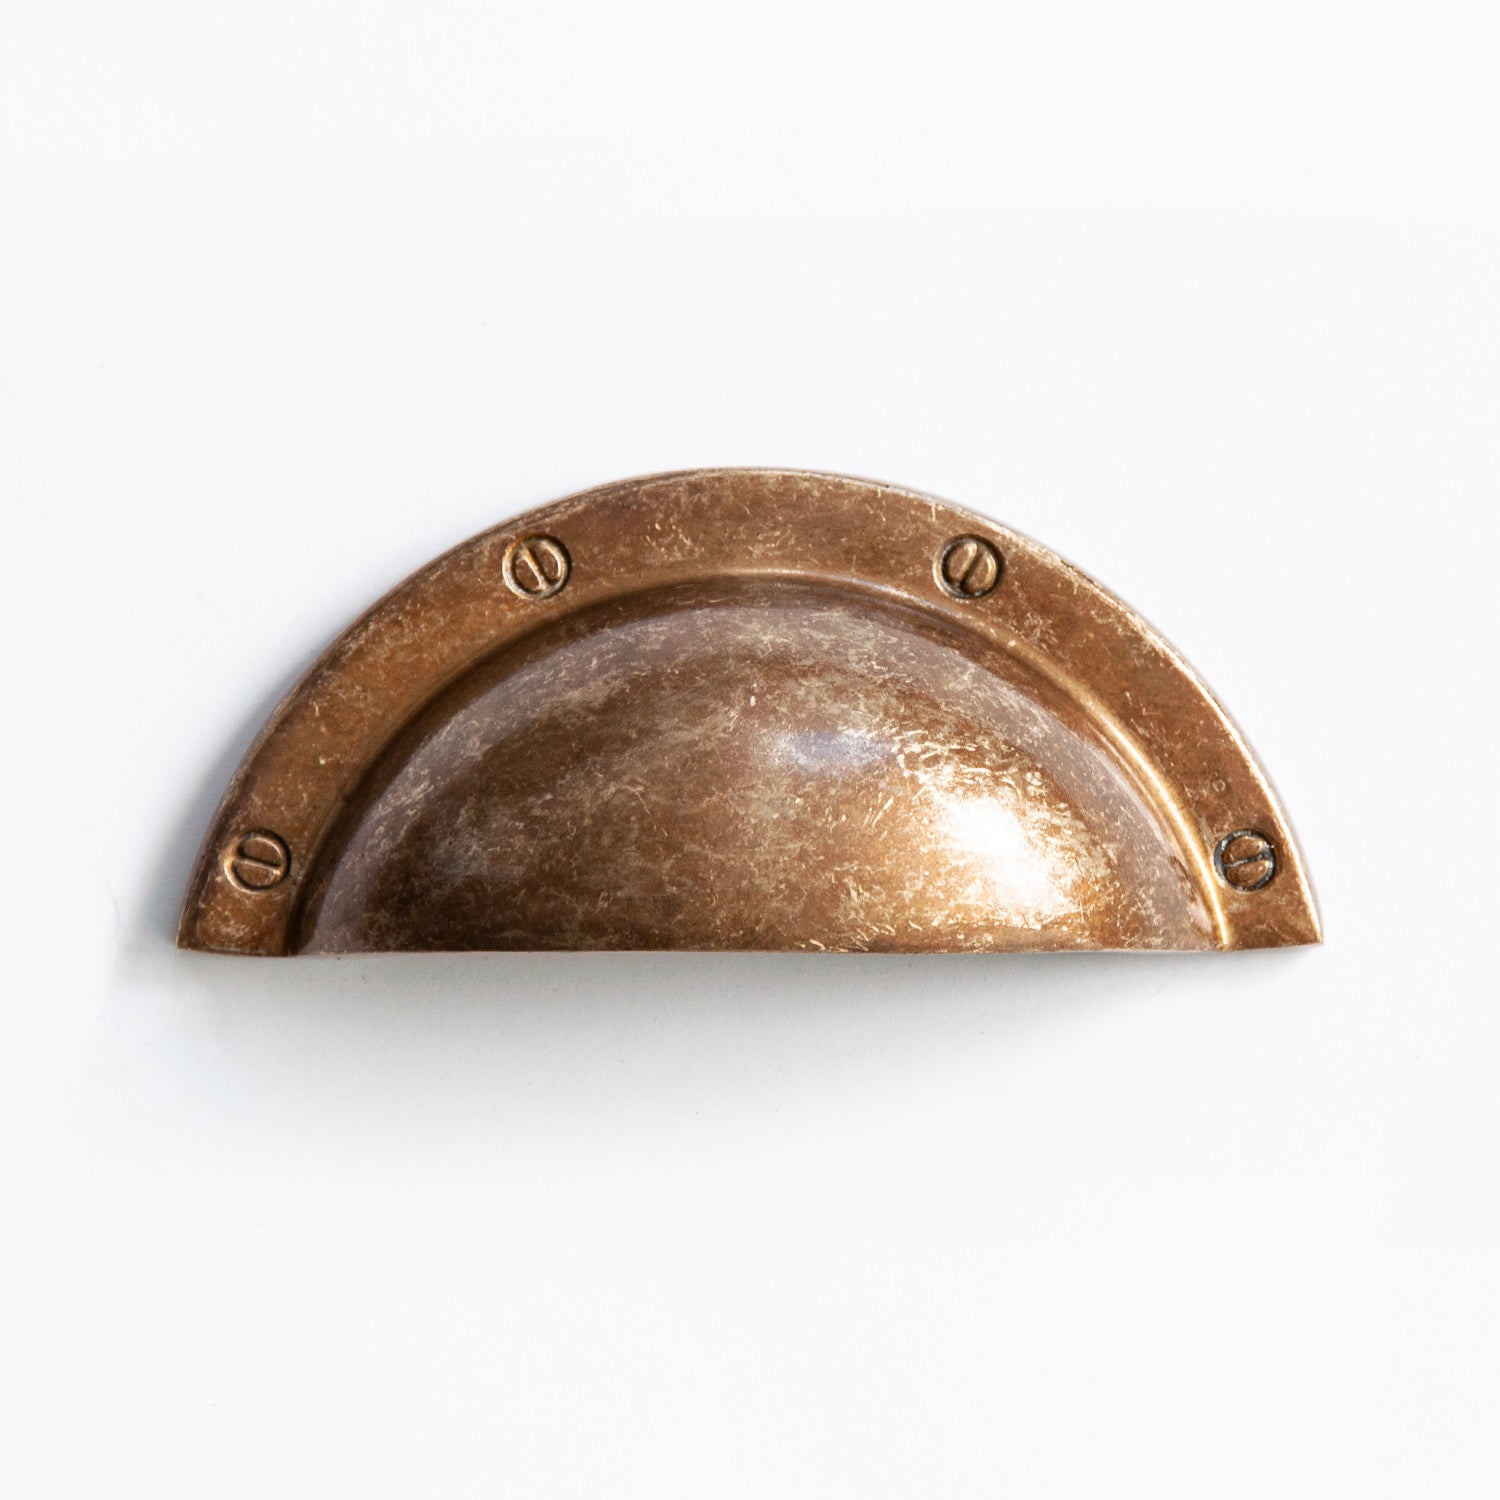 Decorative Cup Pulls From Clayton Munroe – Weyland - Incorporating